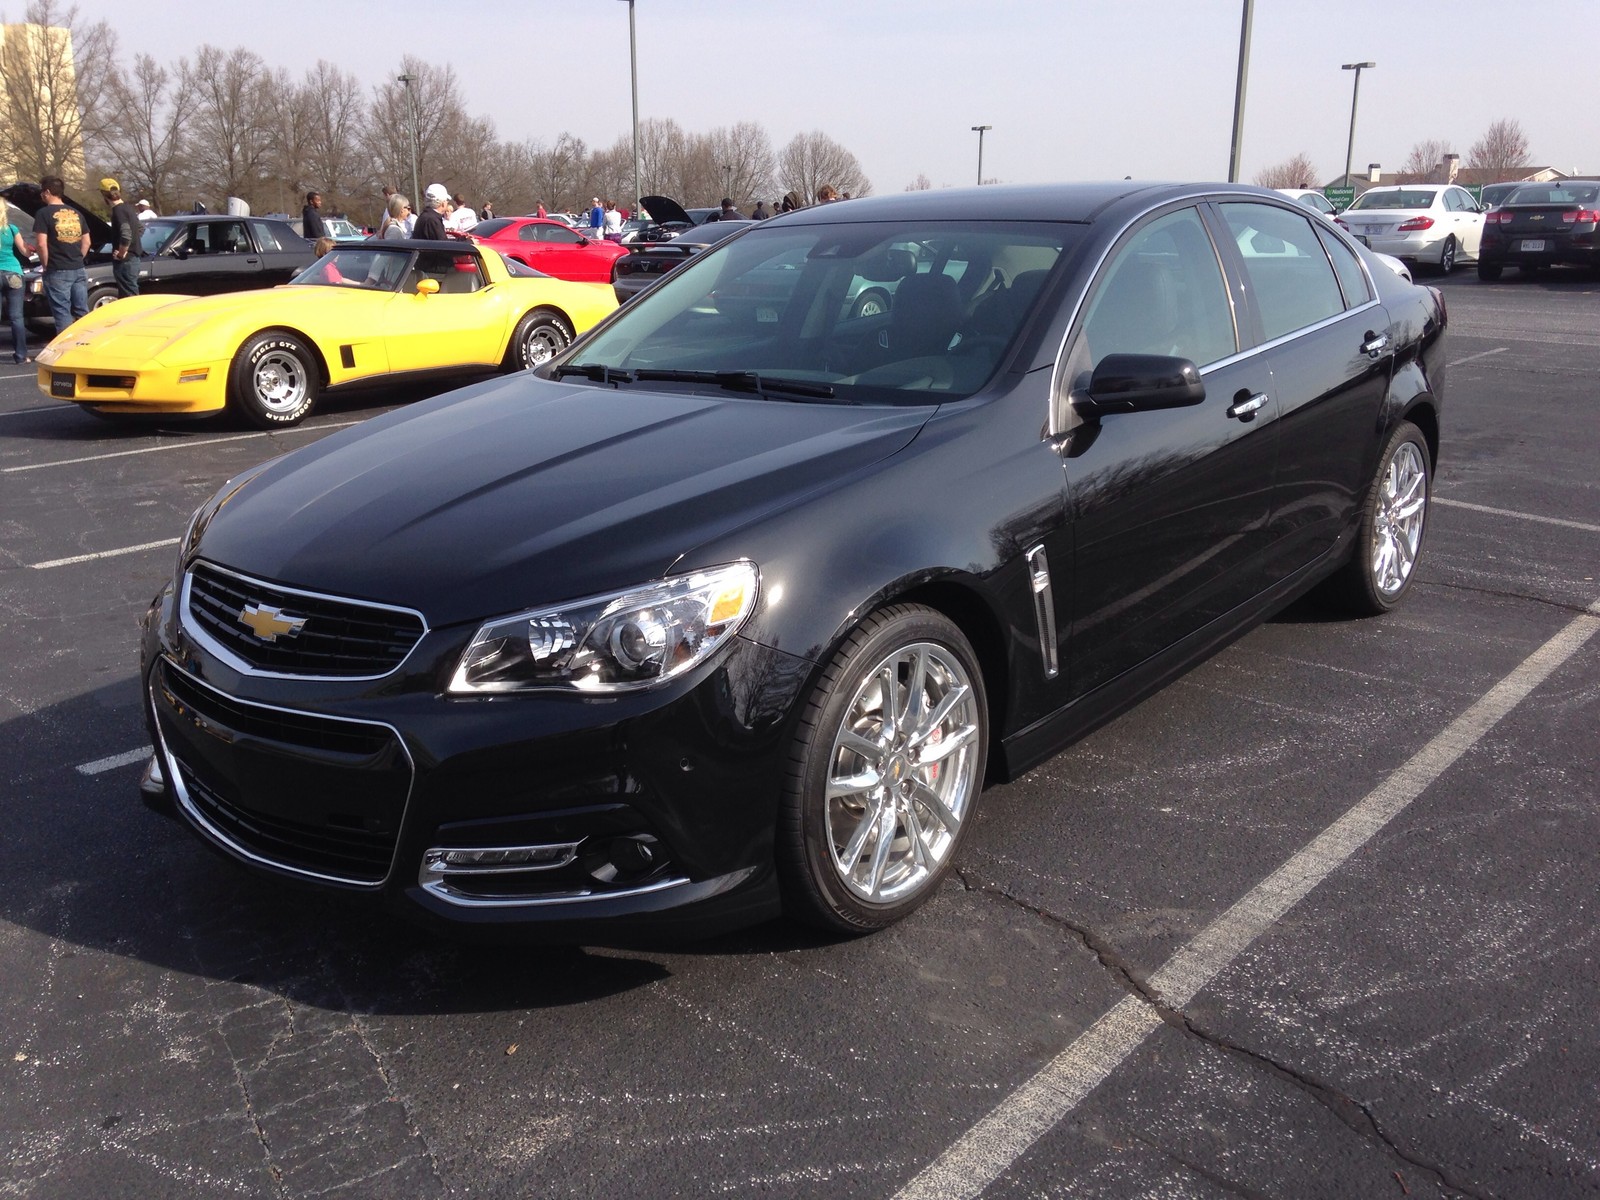 Chevy ss 0-60